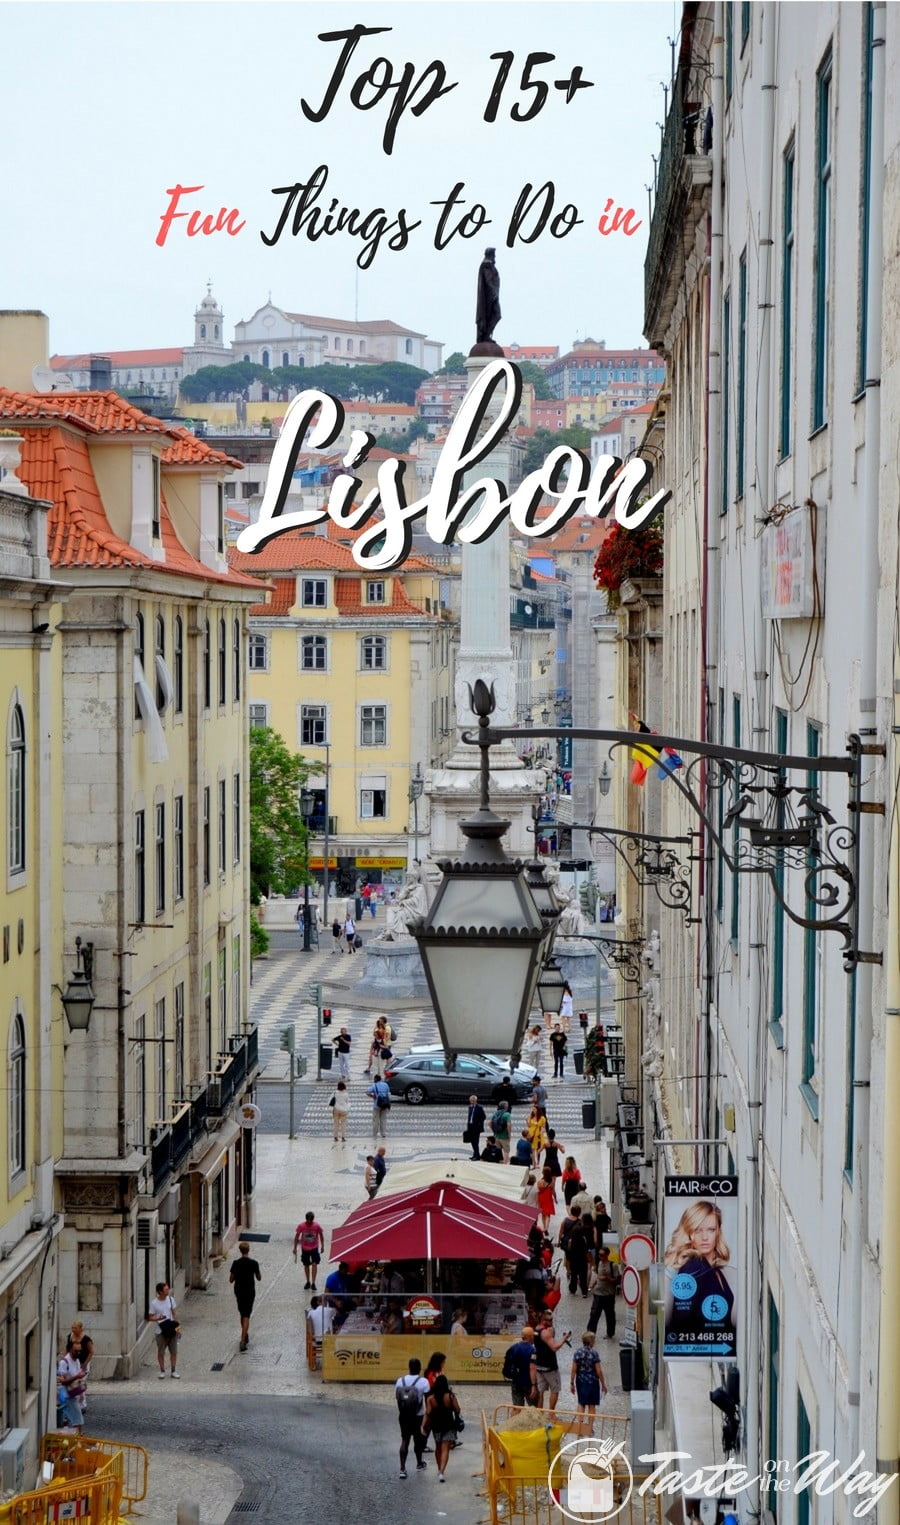 Top 15+ Best Things to Do in Lisbon, Portugal - Check out the top 15+ fun #thingstodo in #Lisbon, #Portugal #travel #photography @tasteontheway